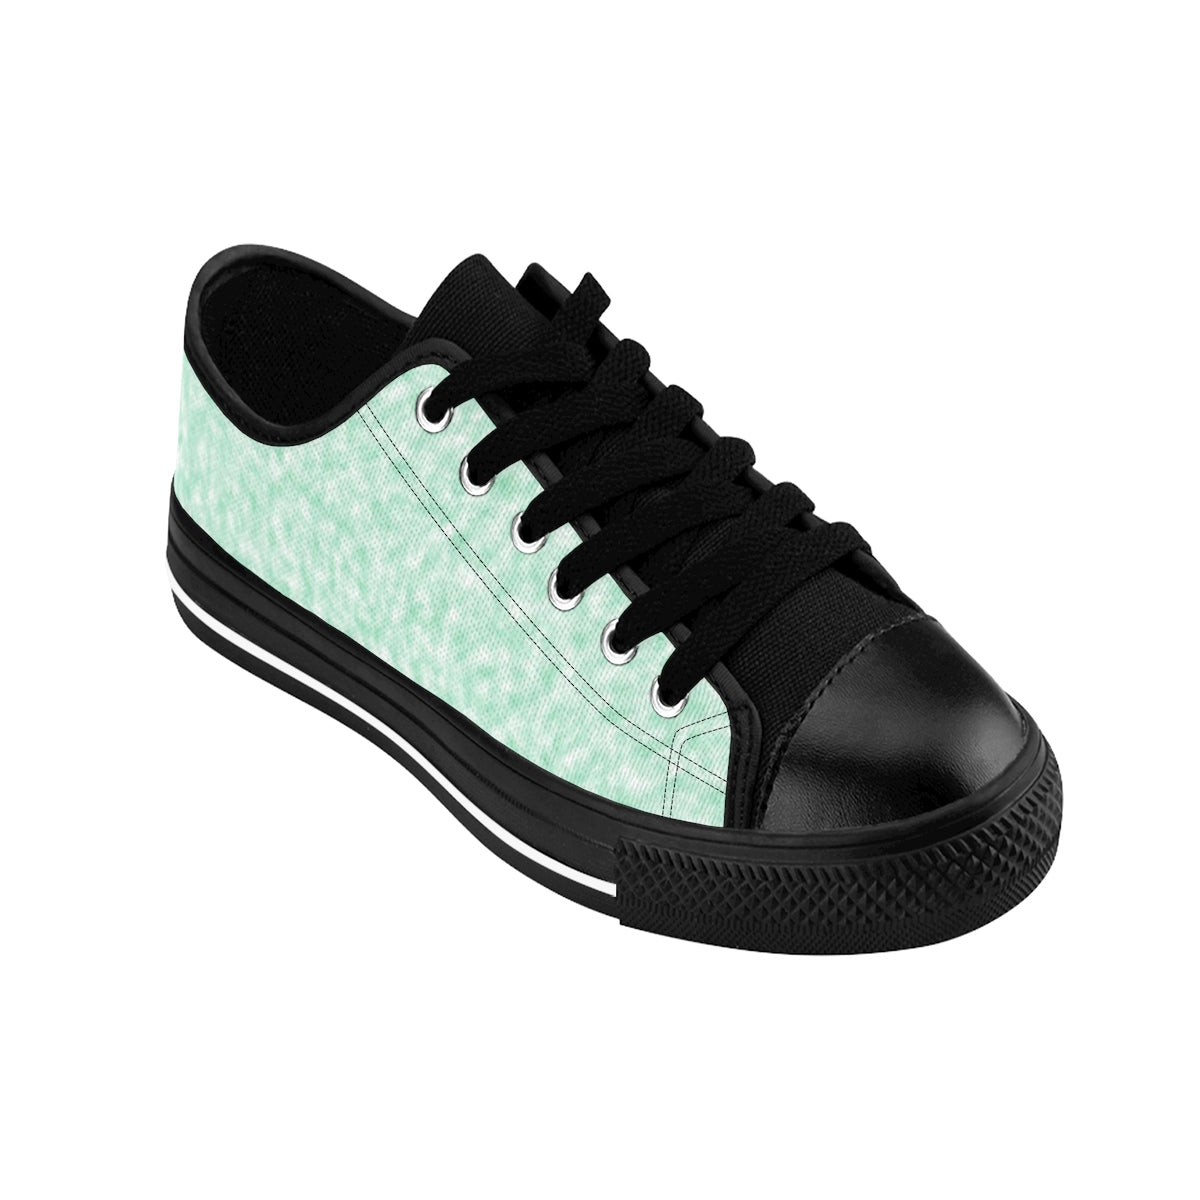 Seafoam Green and White Clouds Women's Sneakers